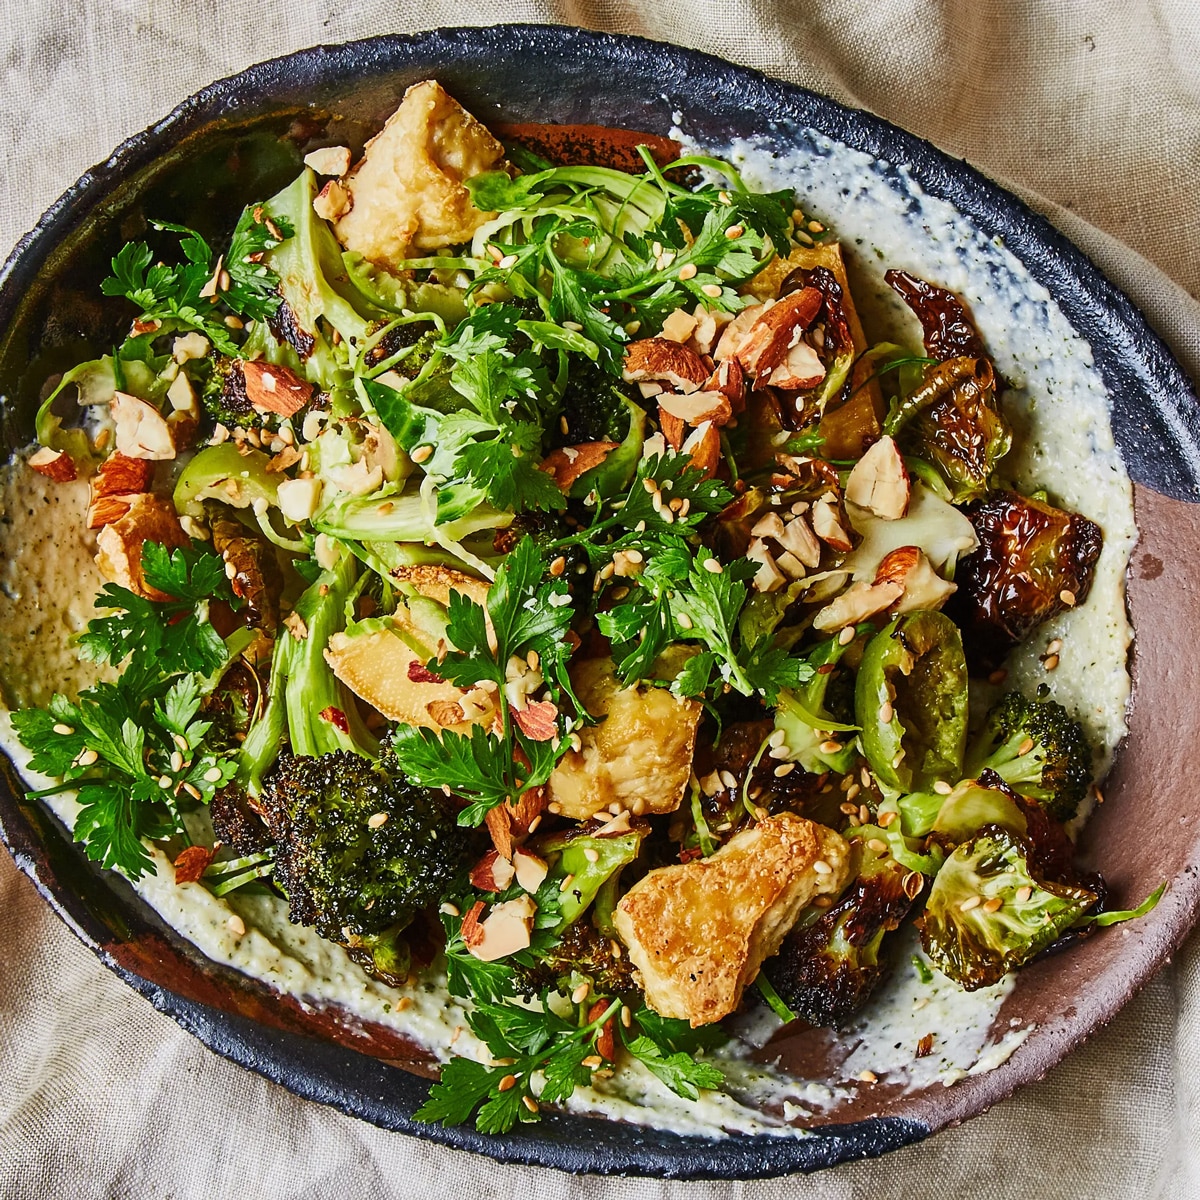 Roasted broccoli and tofu with creamy miso dressing